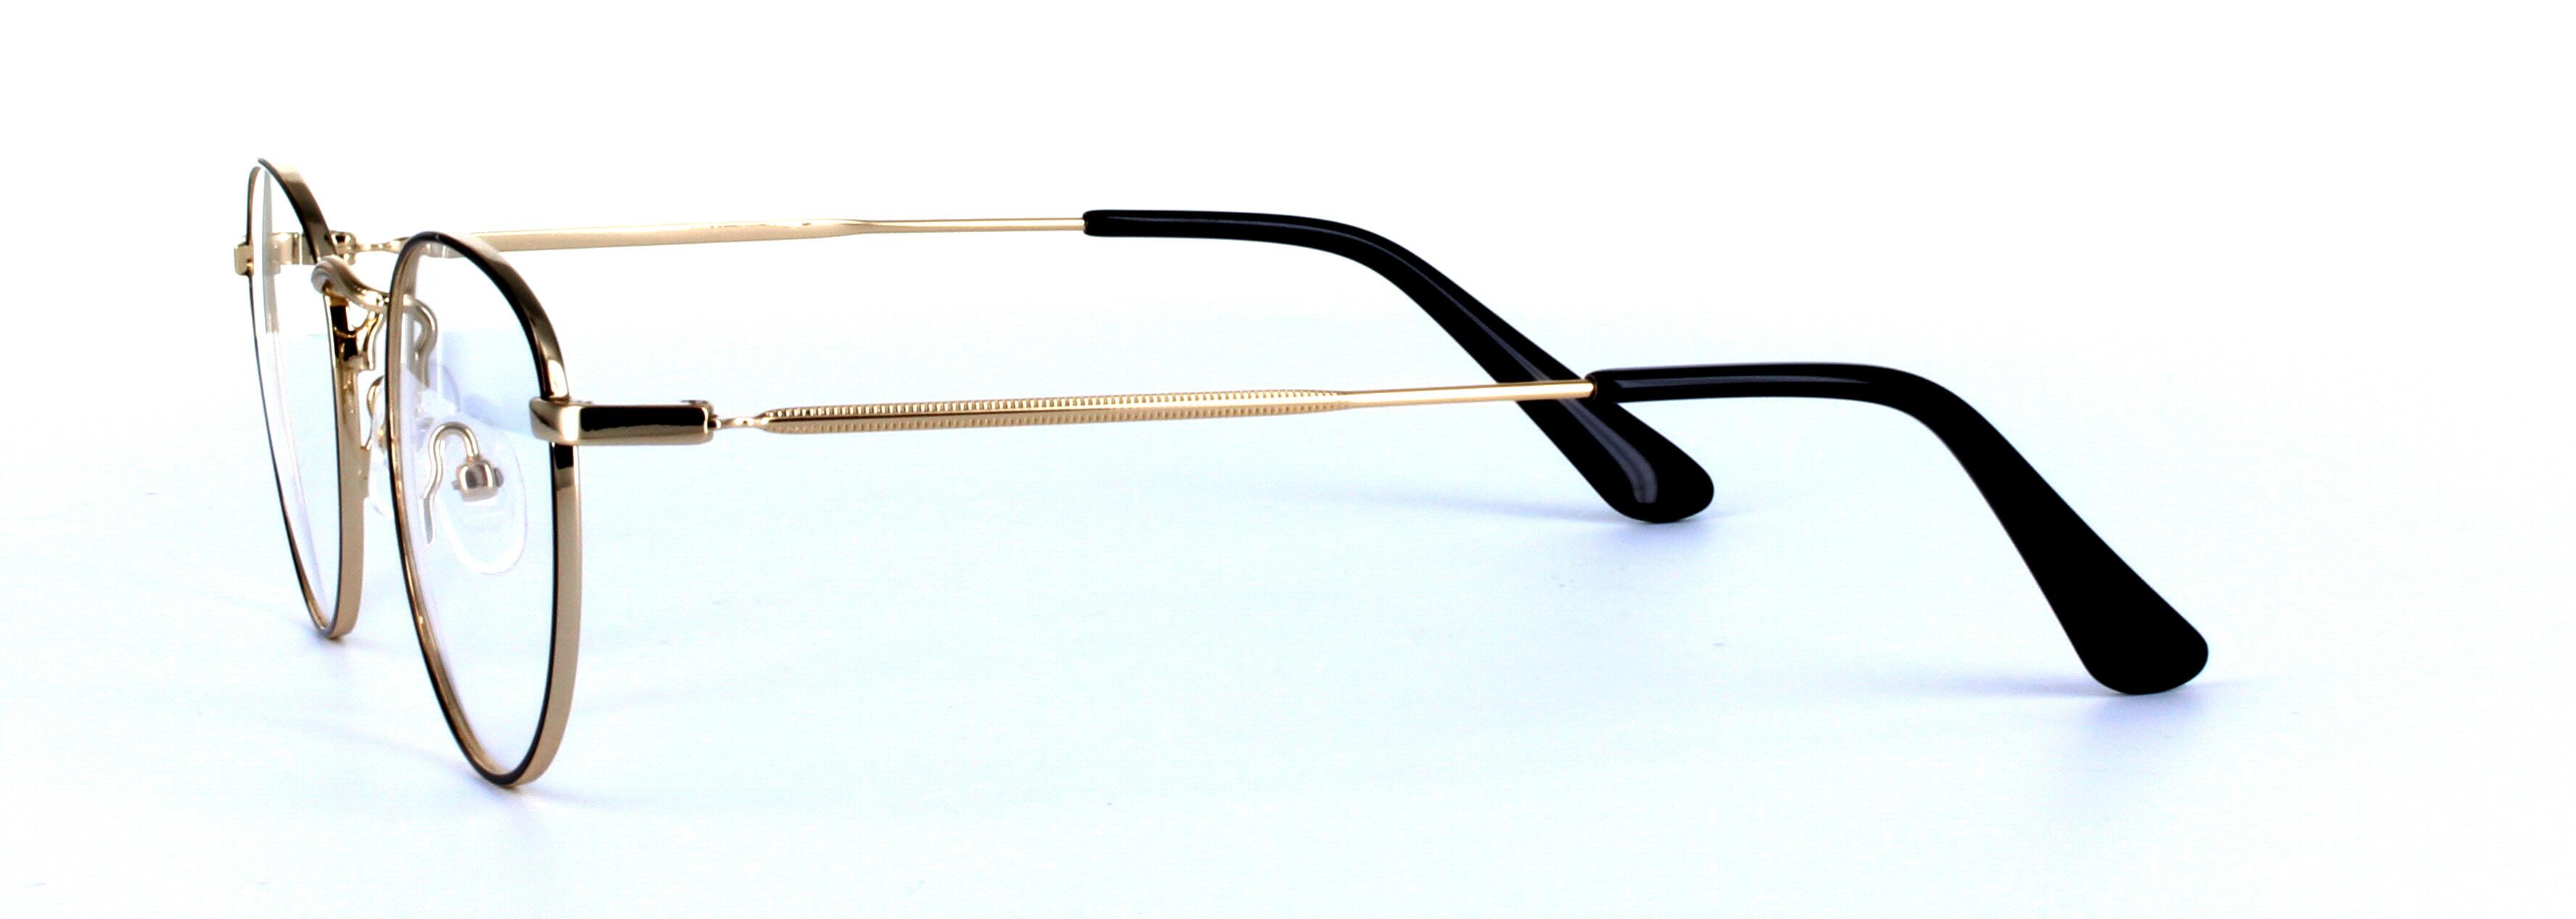 Birdy Gold Full Rim Round Metal Glasses - Image View 2